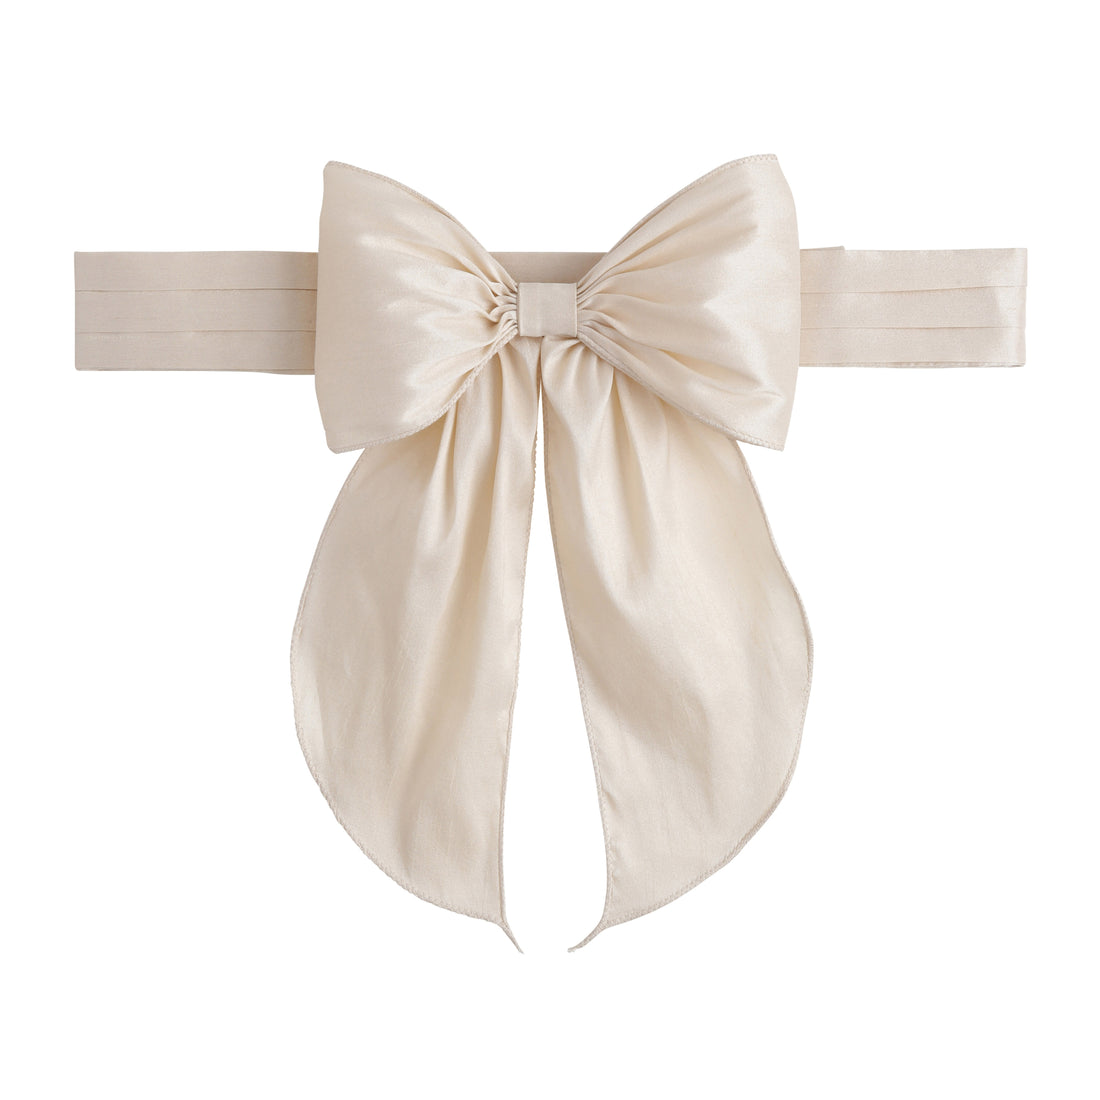 Little English flower girl dress sash, champagne fixed bow sash with adjustable closure